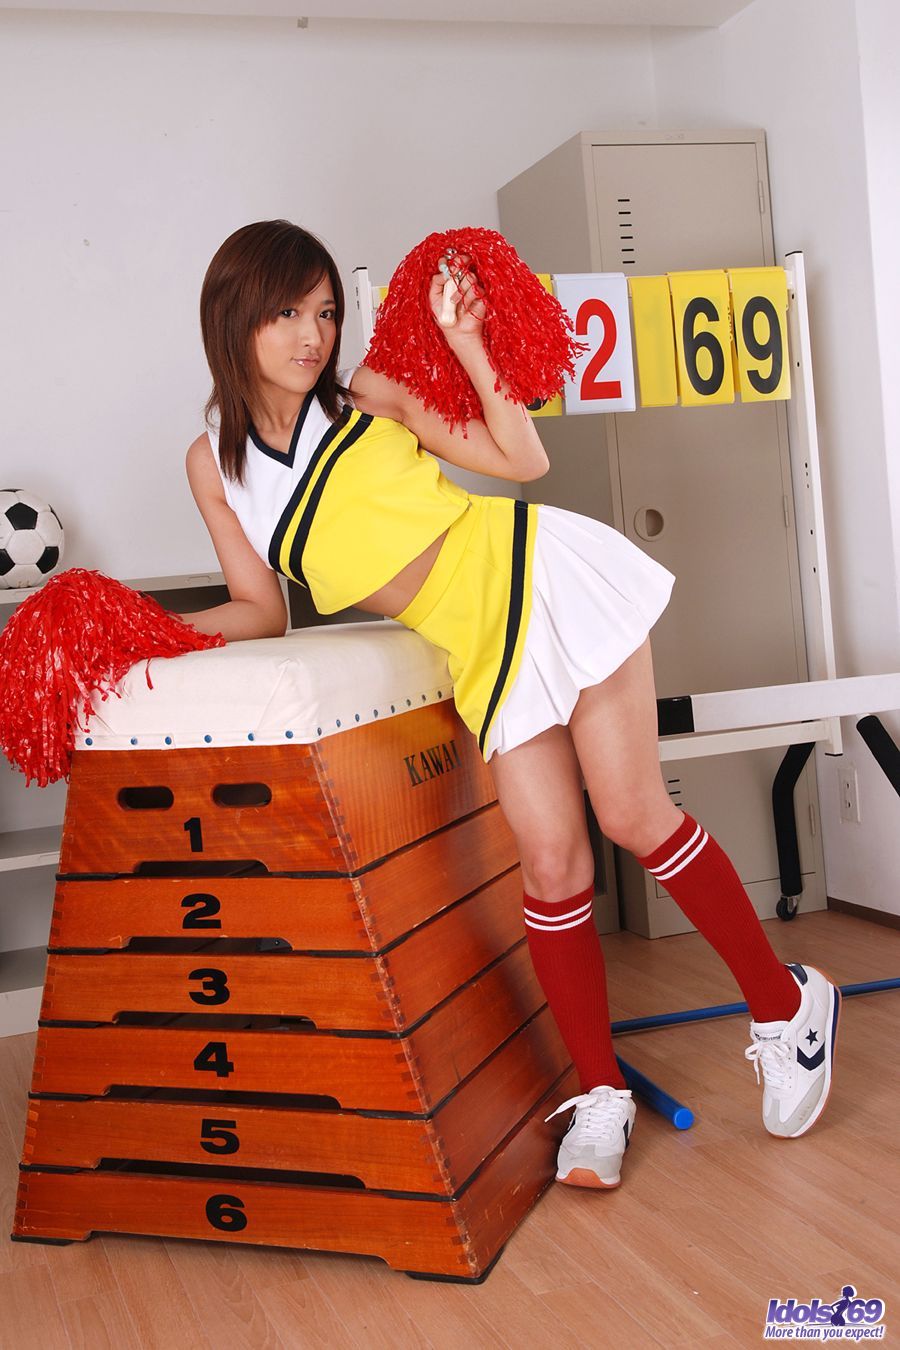 Hairy Asians Socks Porn - Slutty cheerleader shows off her hairy pussy in the gym